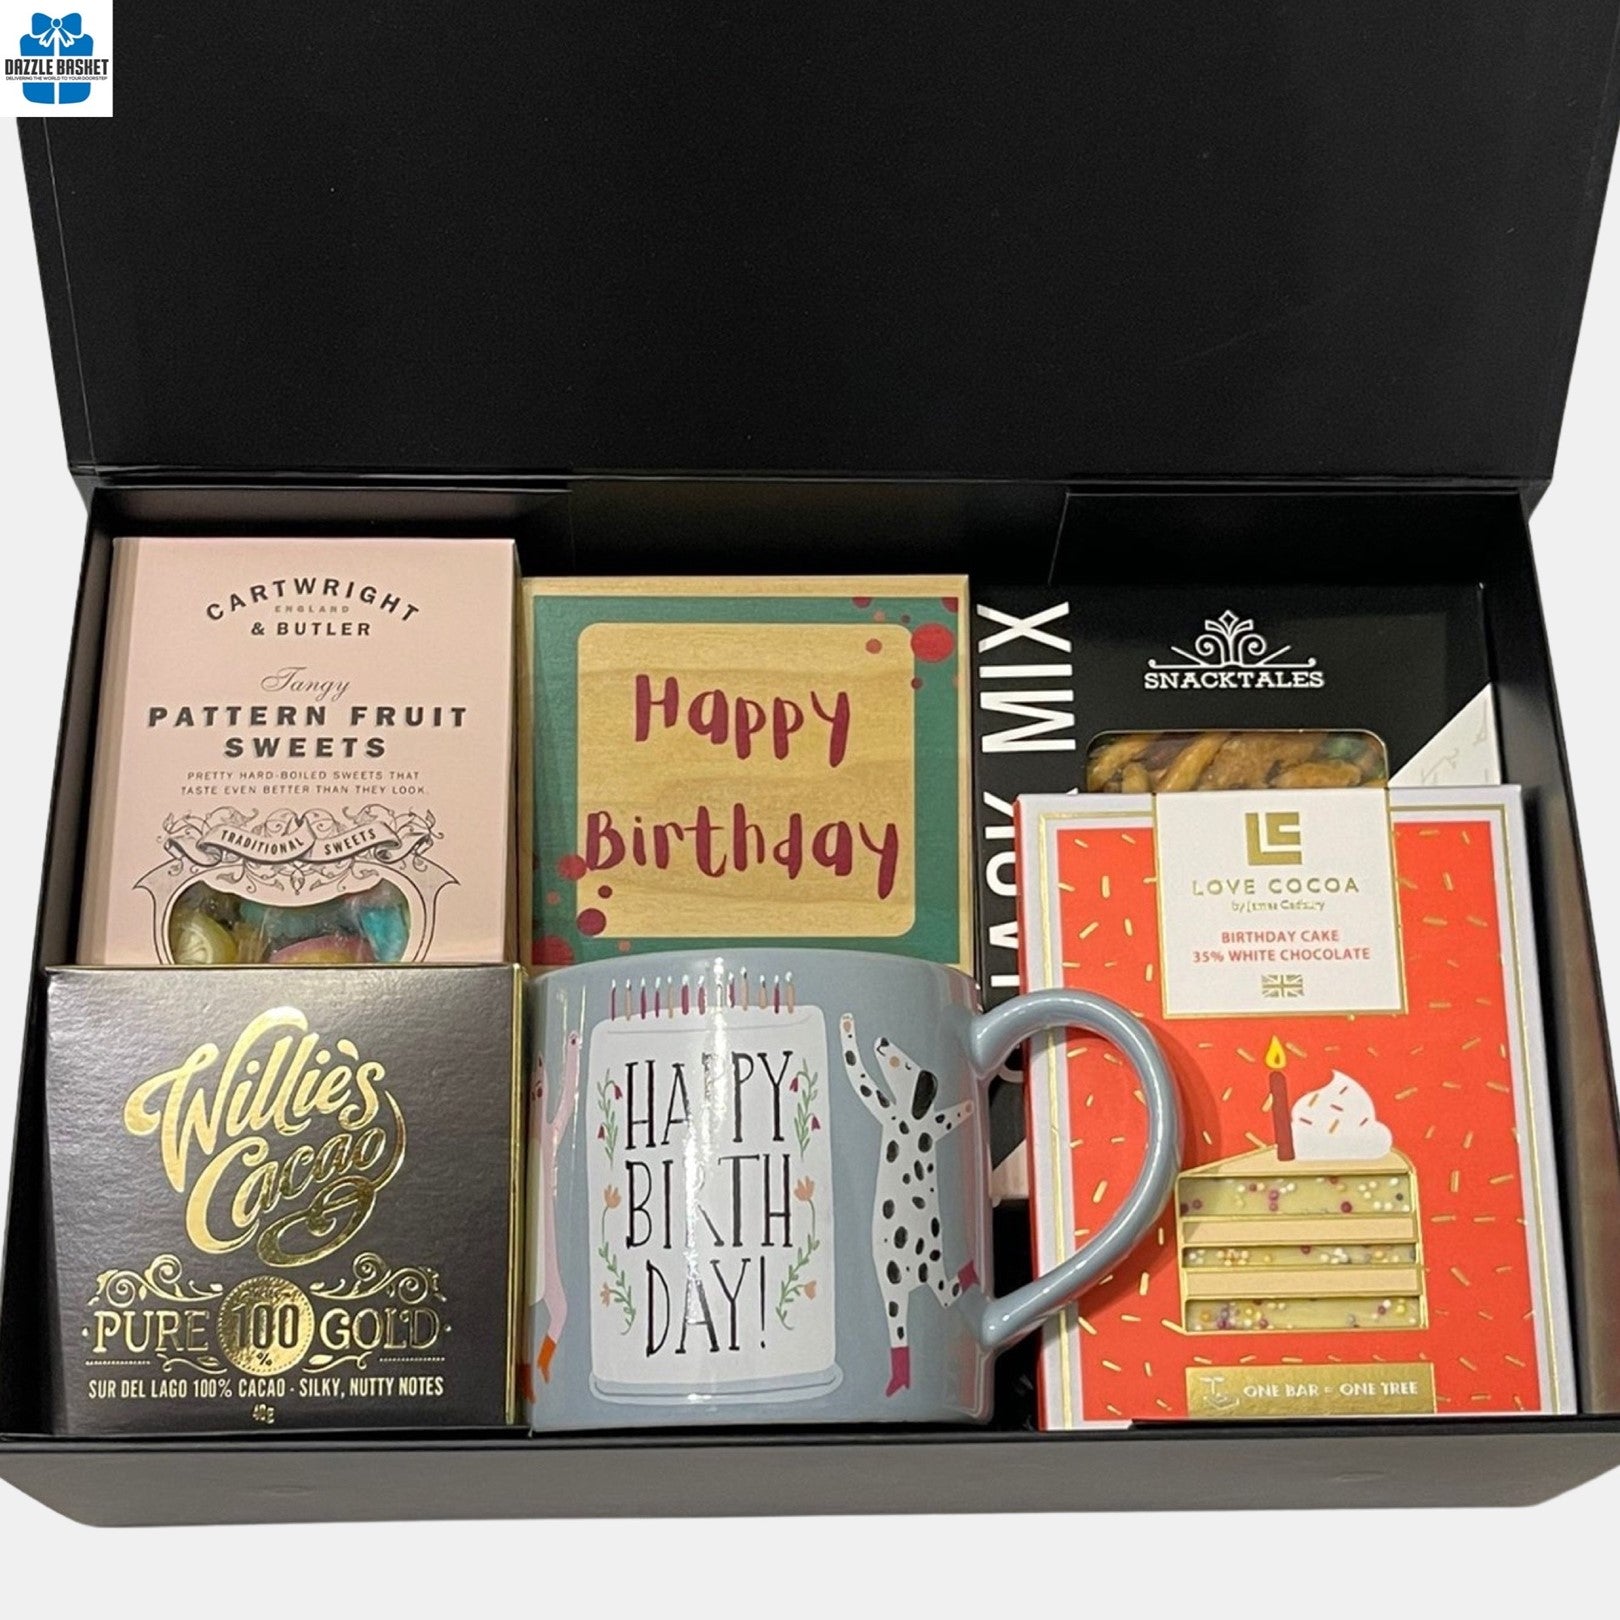 A birthday themed gift box that includes a birthday plaque, mug, chocolate in addition to other gourmet snacks.